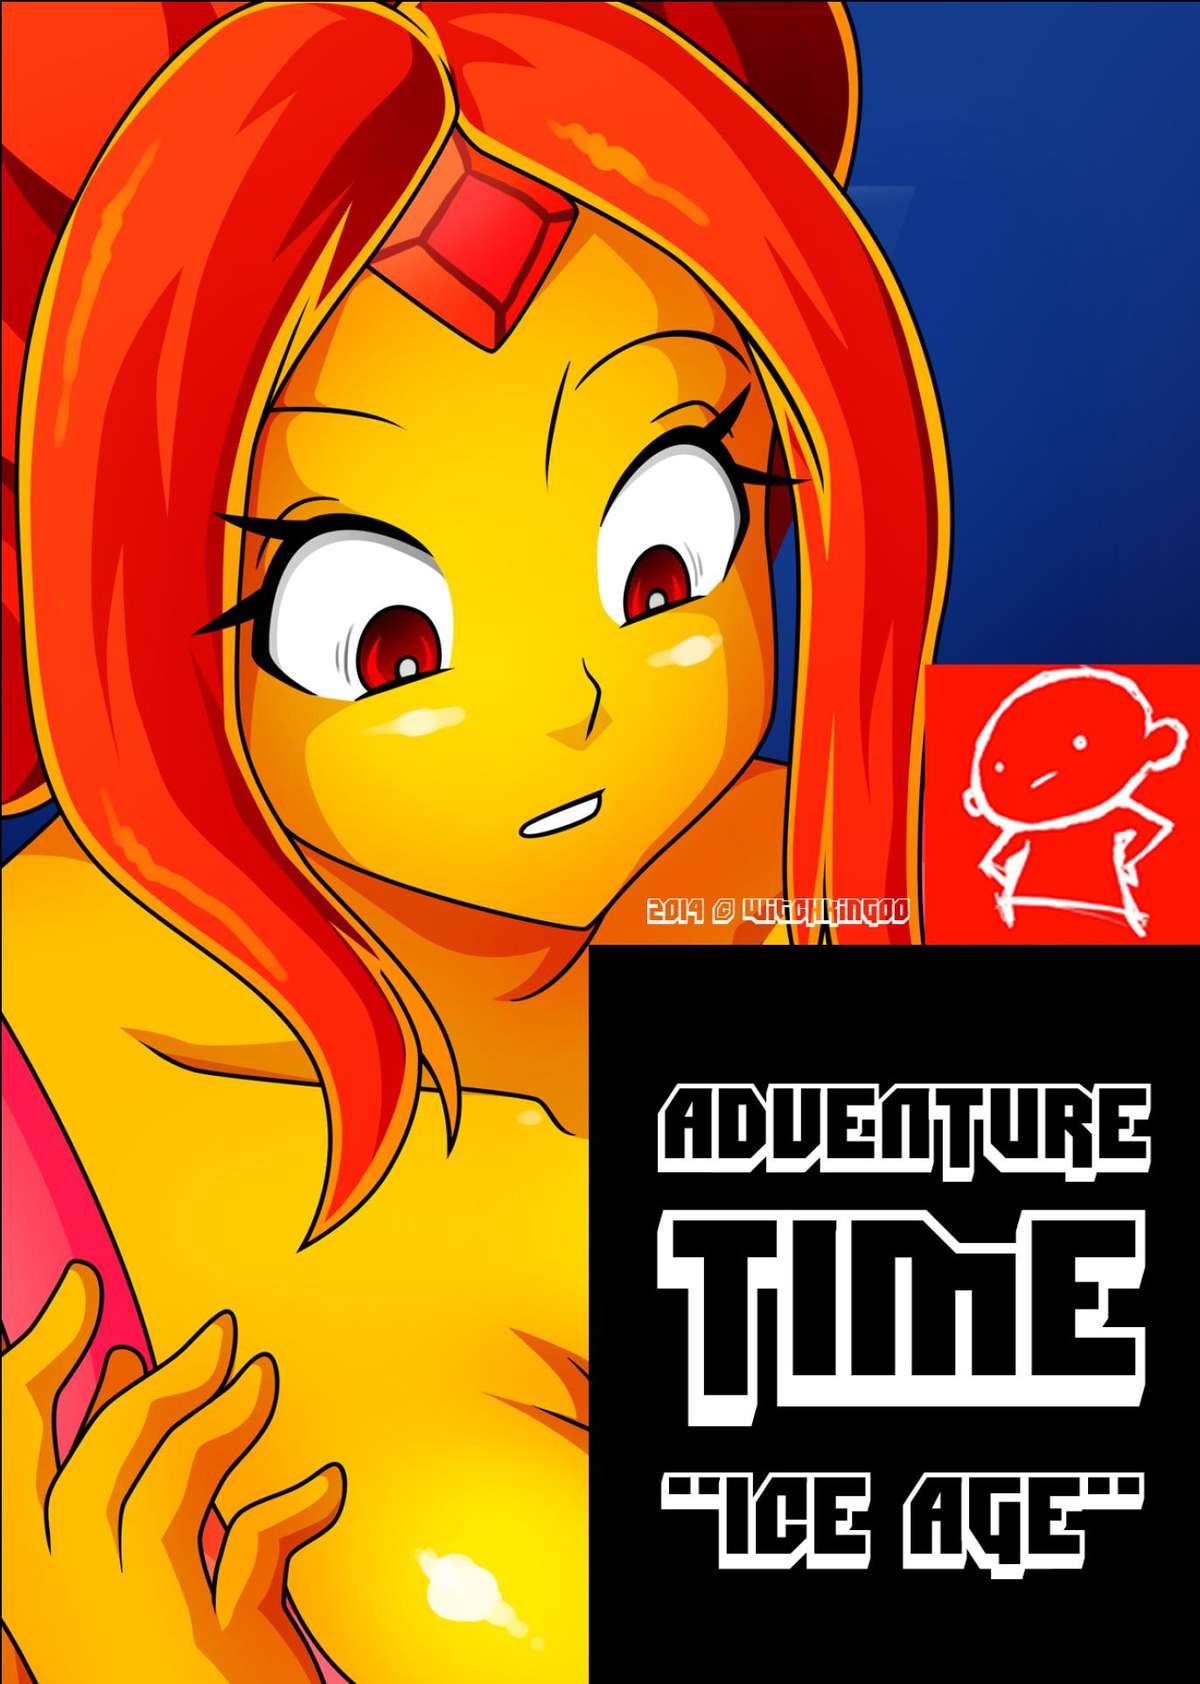 Adventure Time Shemale Porn - Witchking00 - Adventure Time Ice Age â€¢ Free Porn Comics